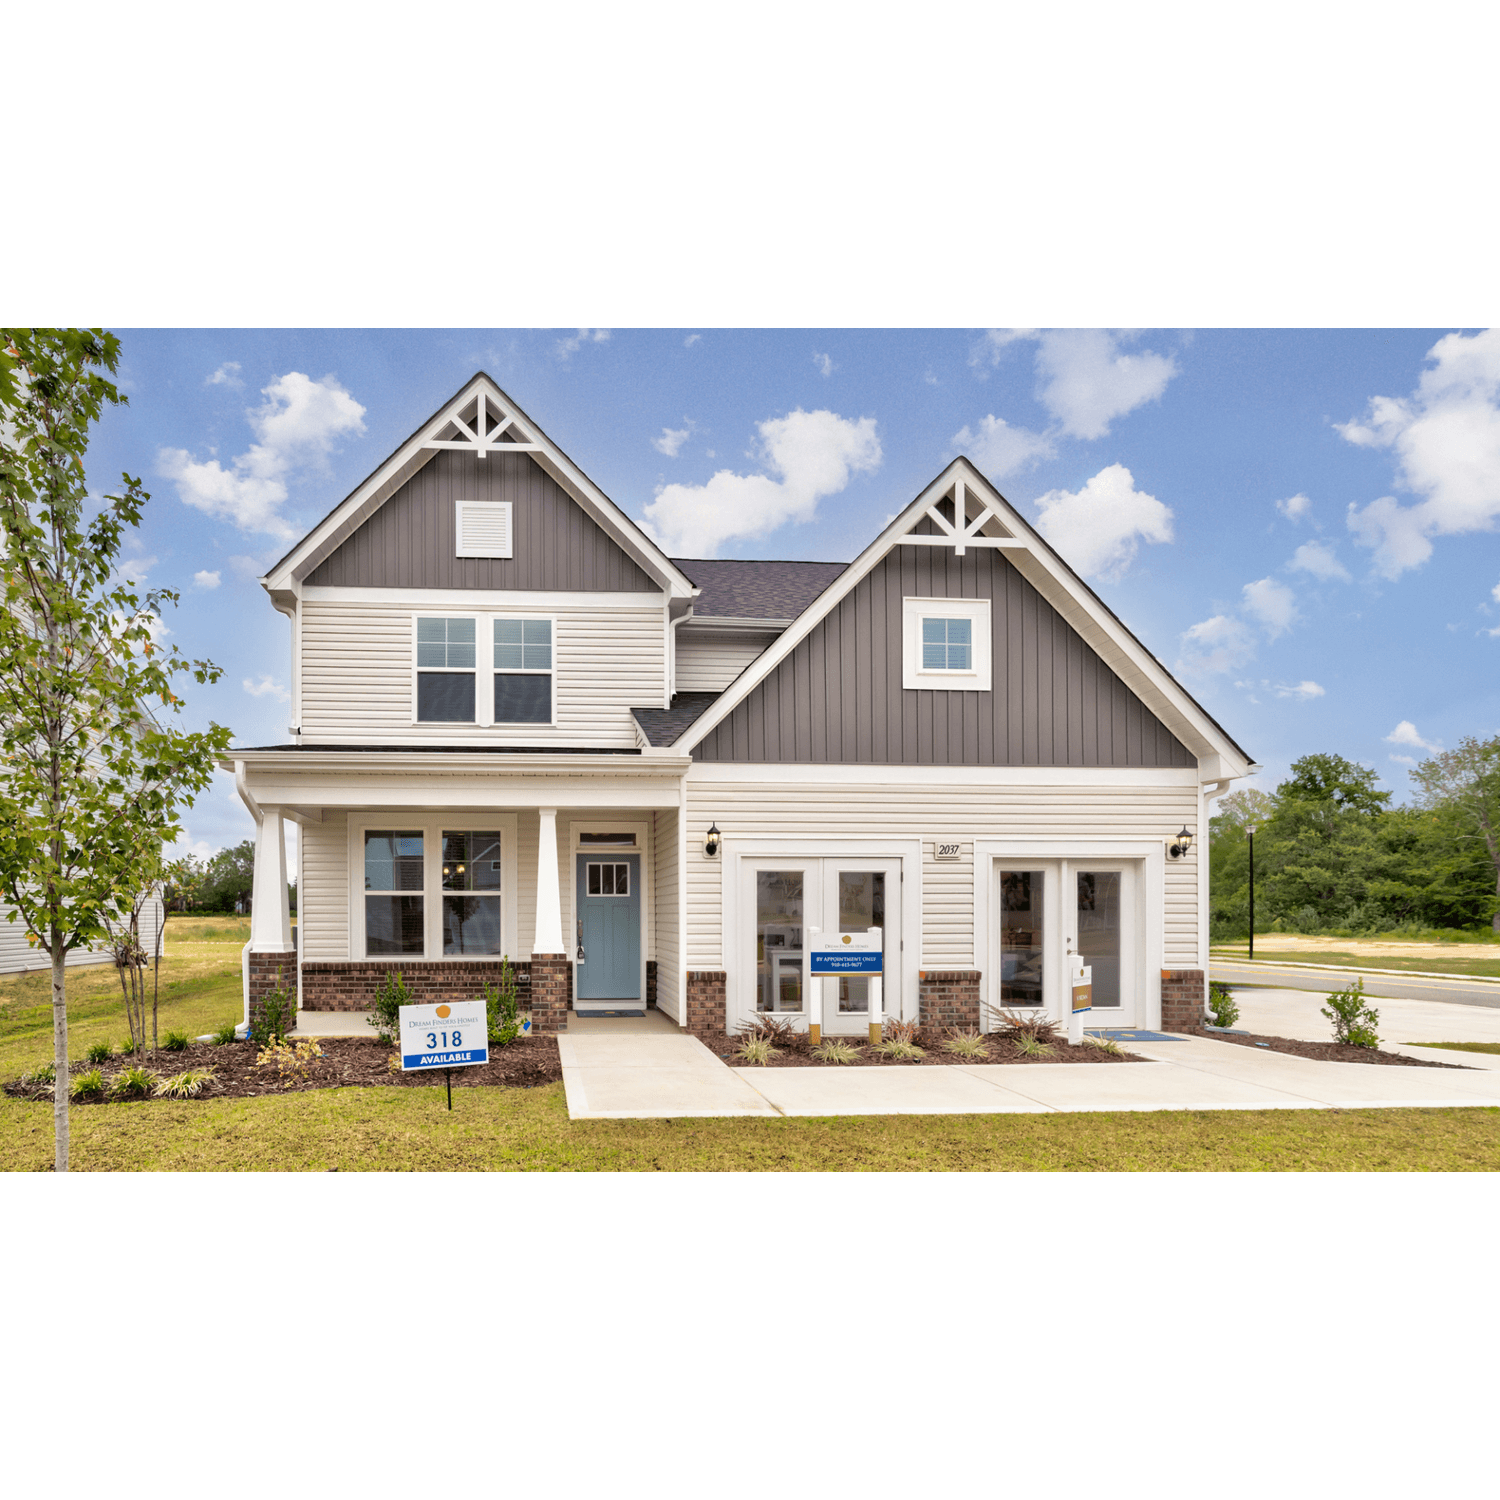 Highcroft xây dựng tại 2037 Lunsford Drive, Fayetteville, NC 28314